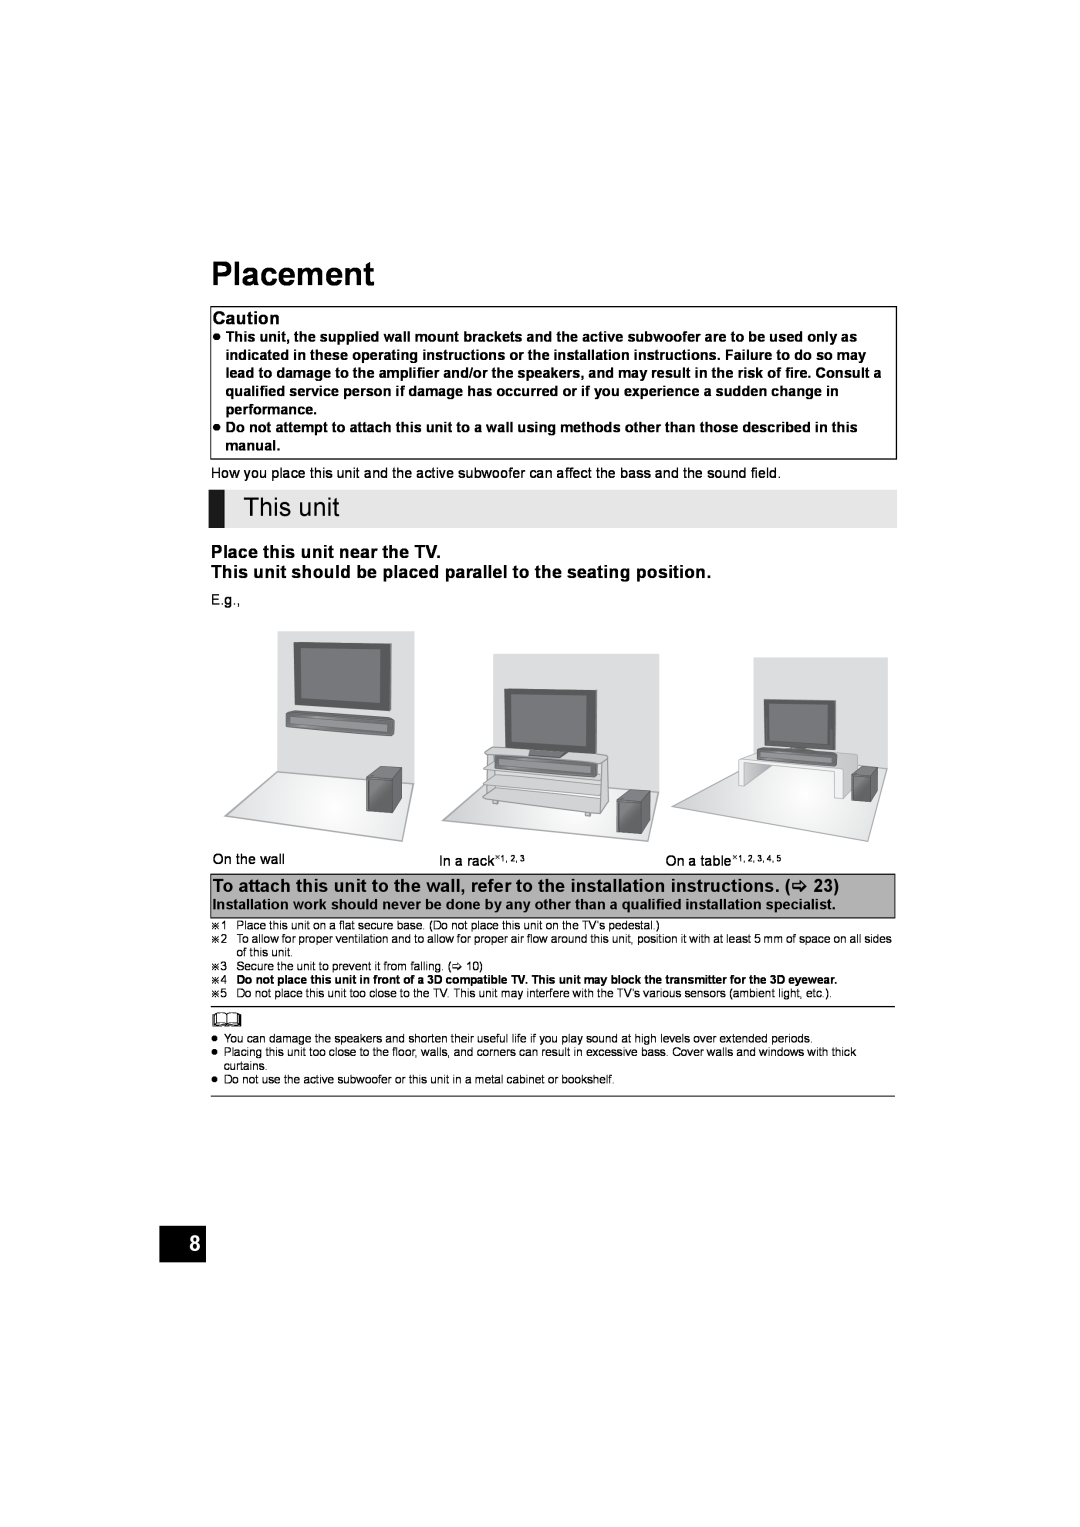 Panasonic SC-HTB500 operating instructions Placement, This unit, Place this unit near the TV 